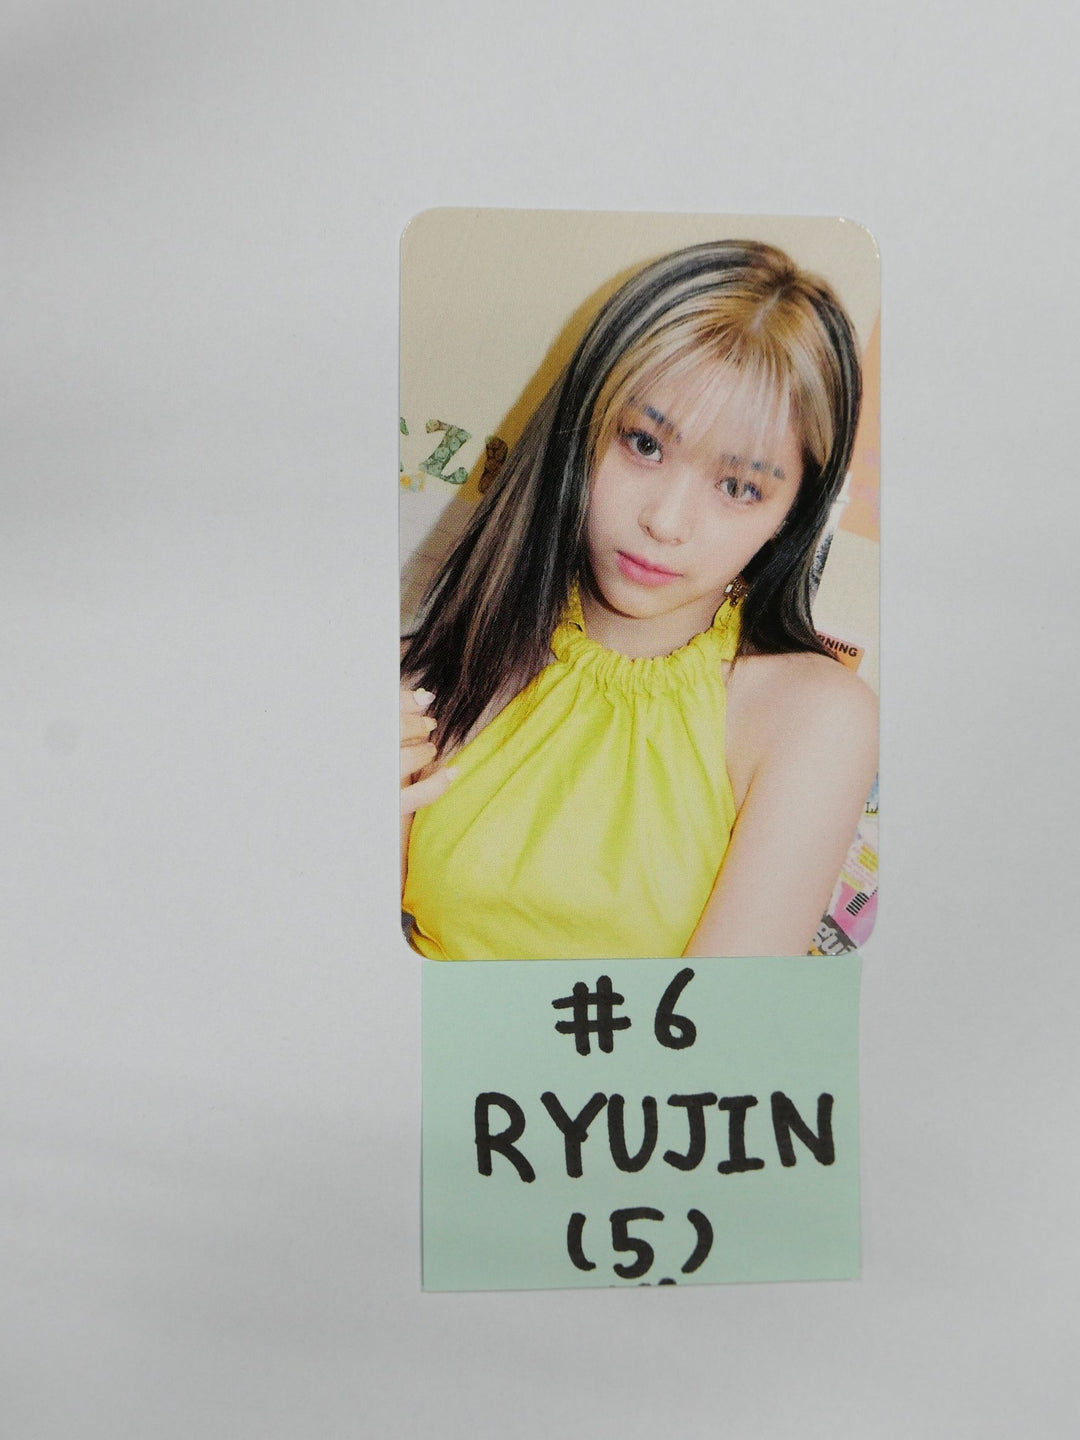 ITZY 'CRAZY IN LOVE' - Withdrama Luckydraw Photocard Round 2